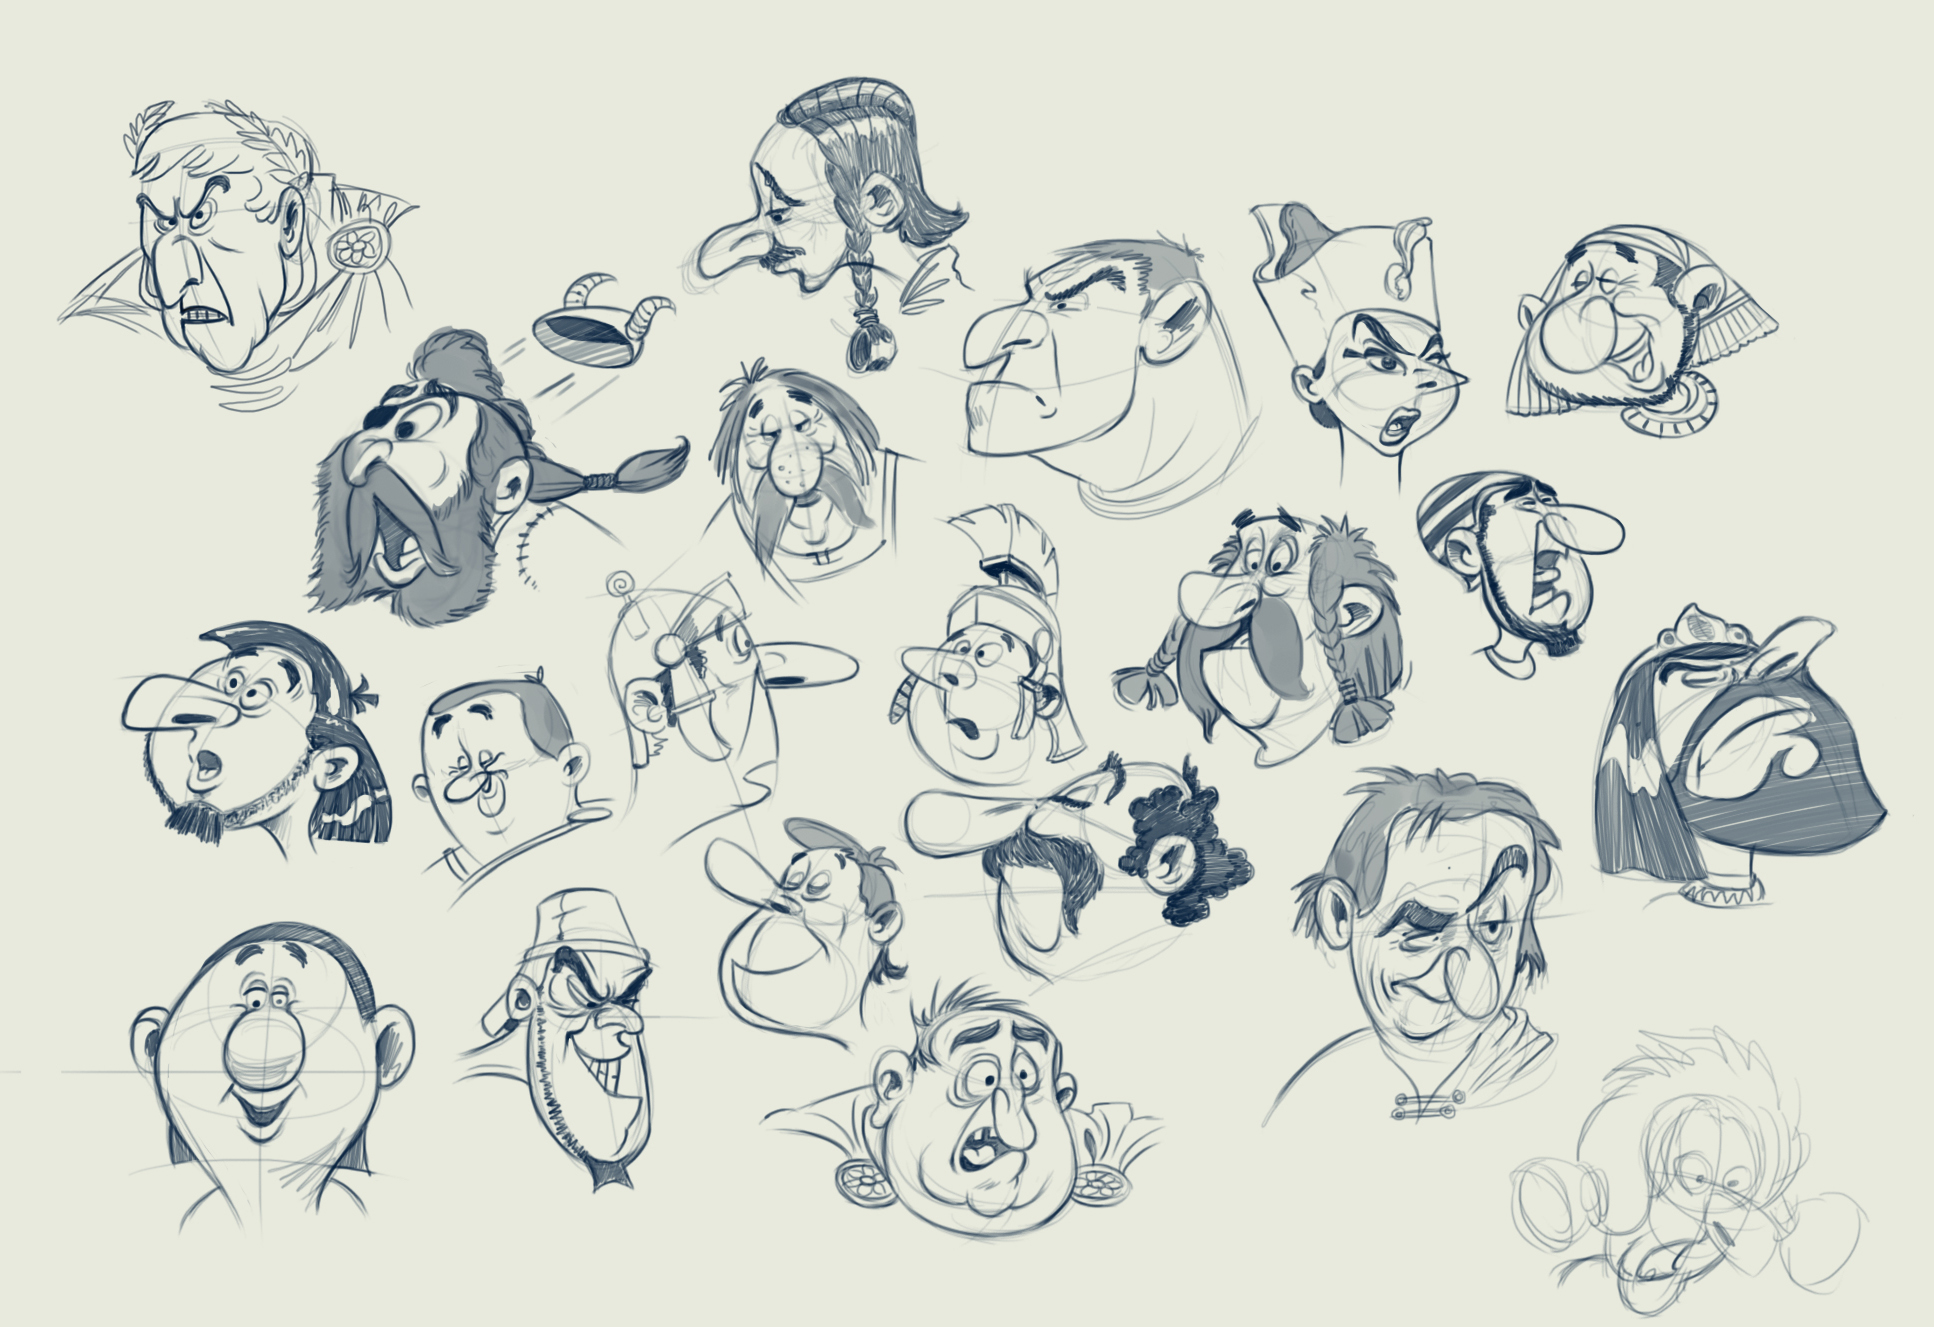 cartoon face study from asterix comic by yogipal117 on DeviantArt